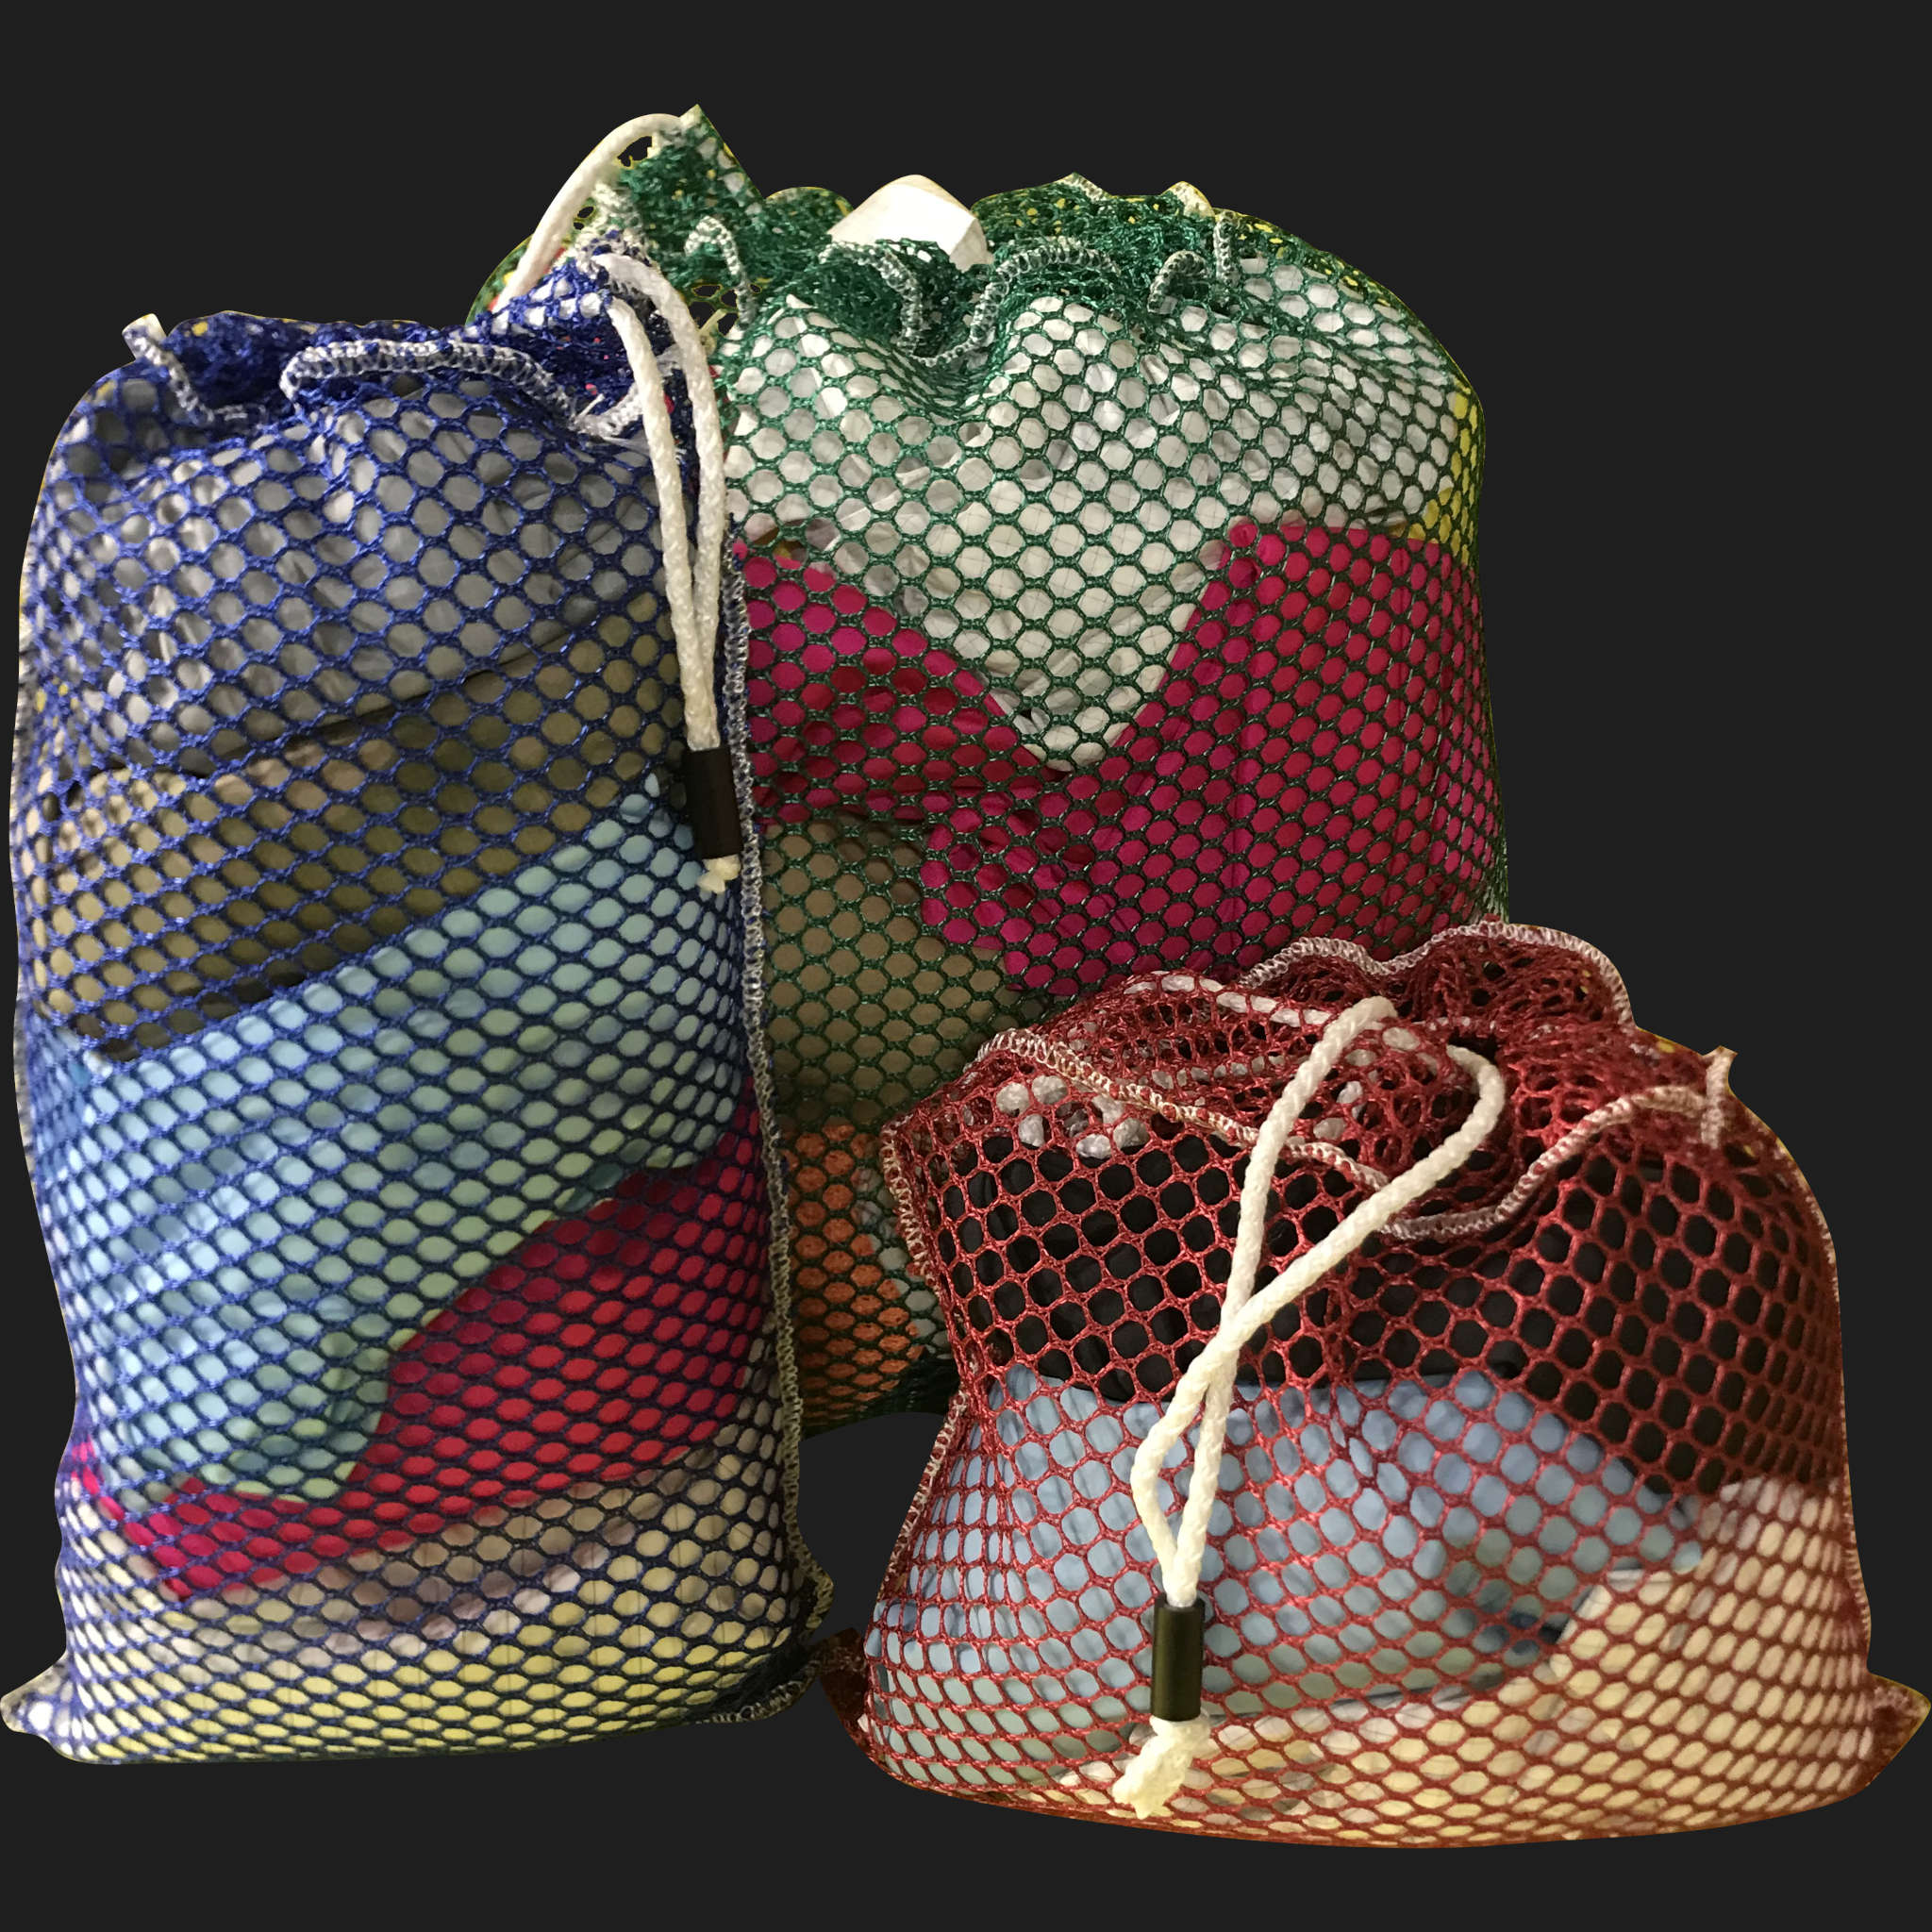 36" x 48" Customized Mesh-Net-Laundry Bags Heavy Duty with Cord and barrellock closure